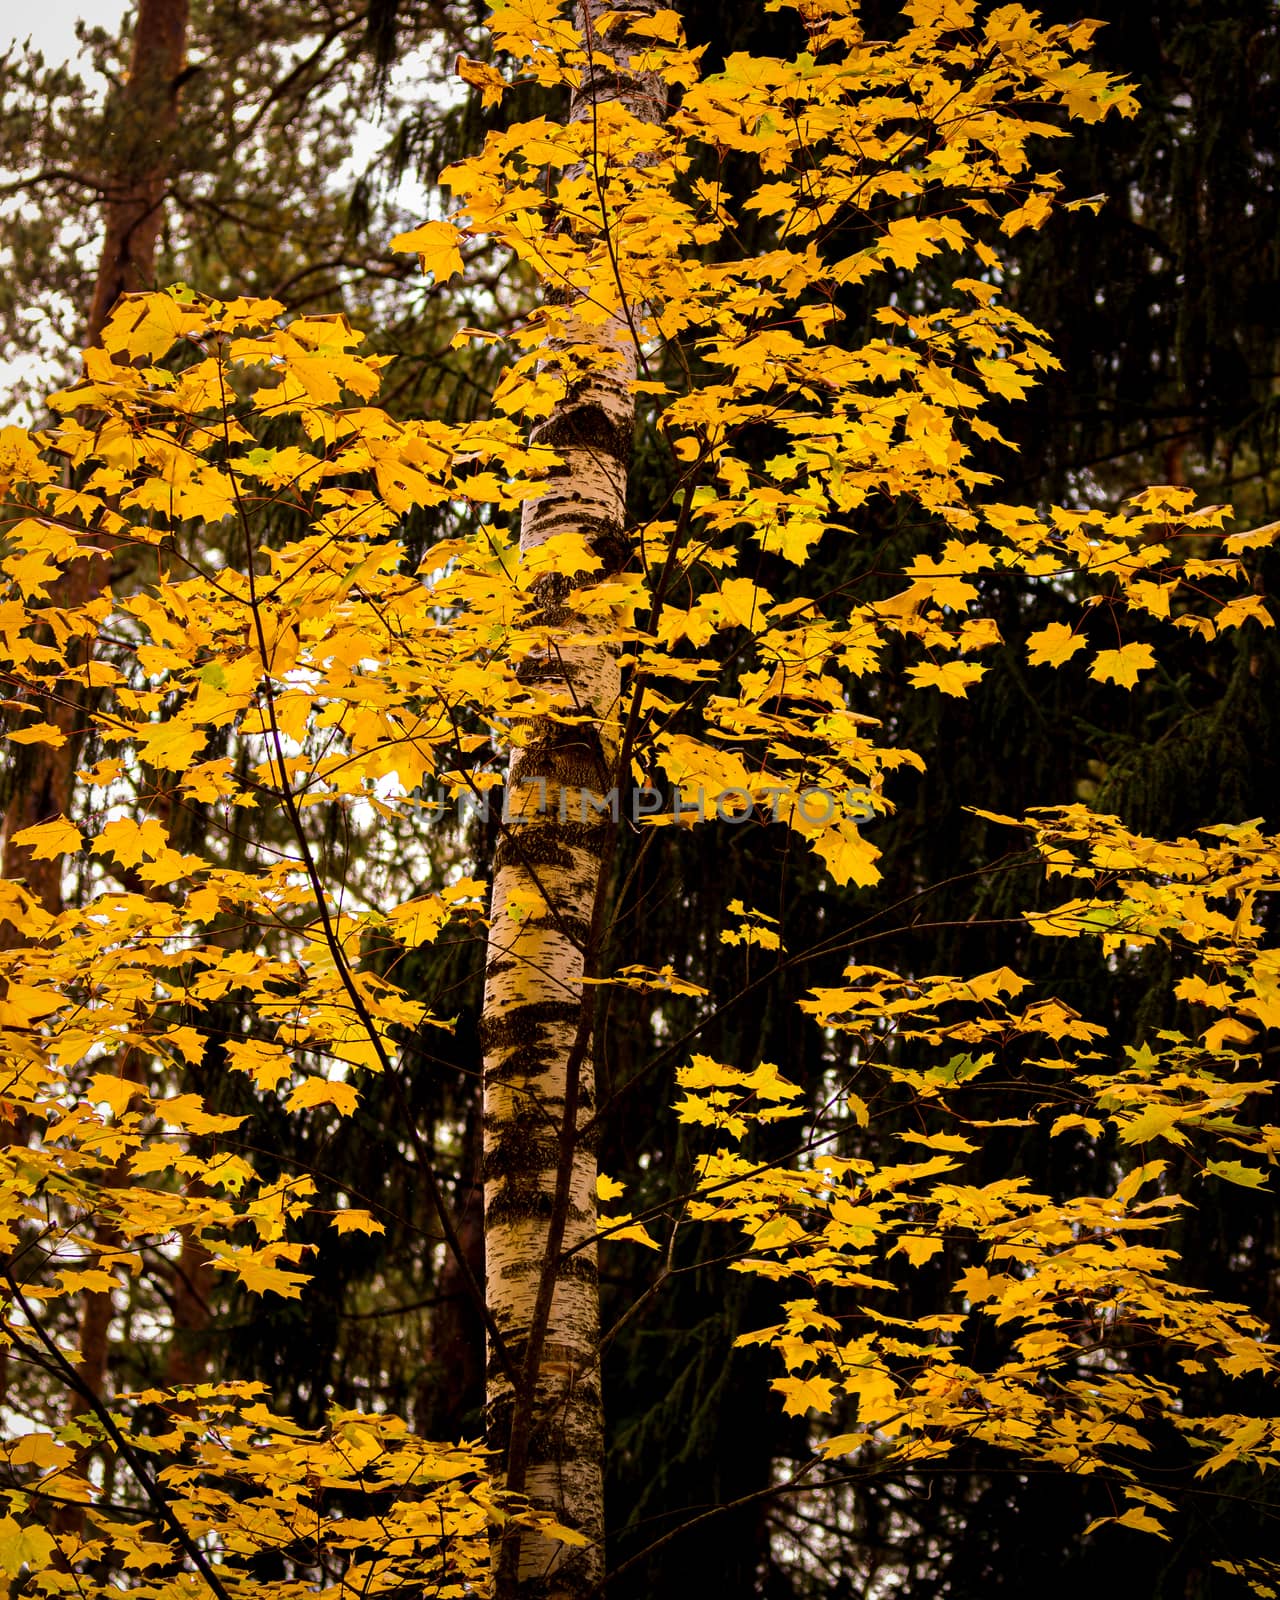 Maple with golden leaves in the autumn pine forest.